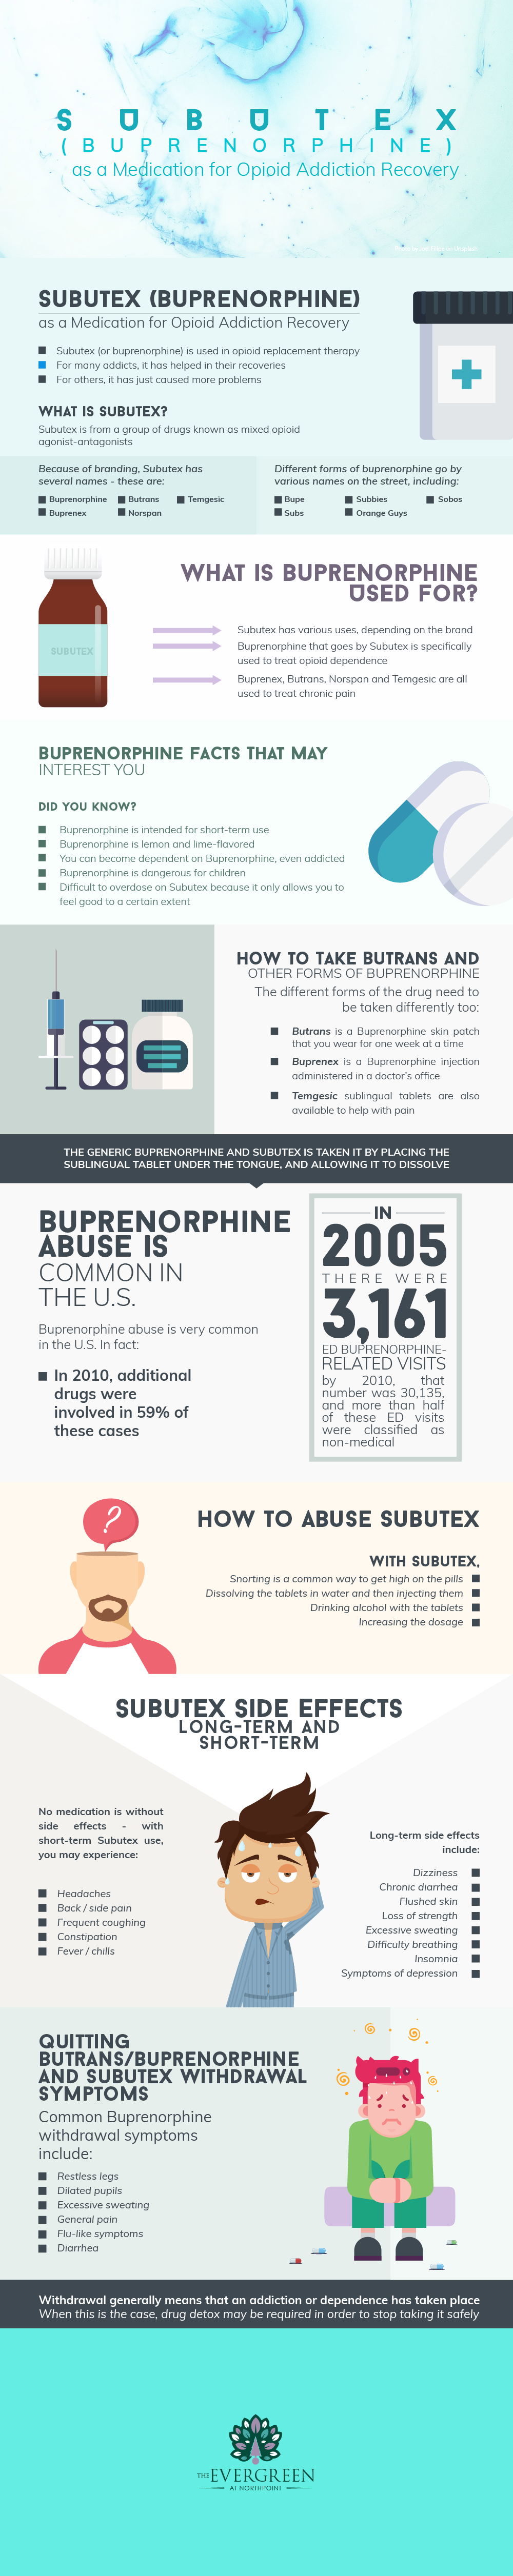 Subutex Buprenorphine as a Medication for Opioid Addiction Recovery